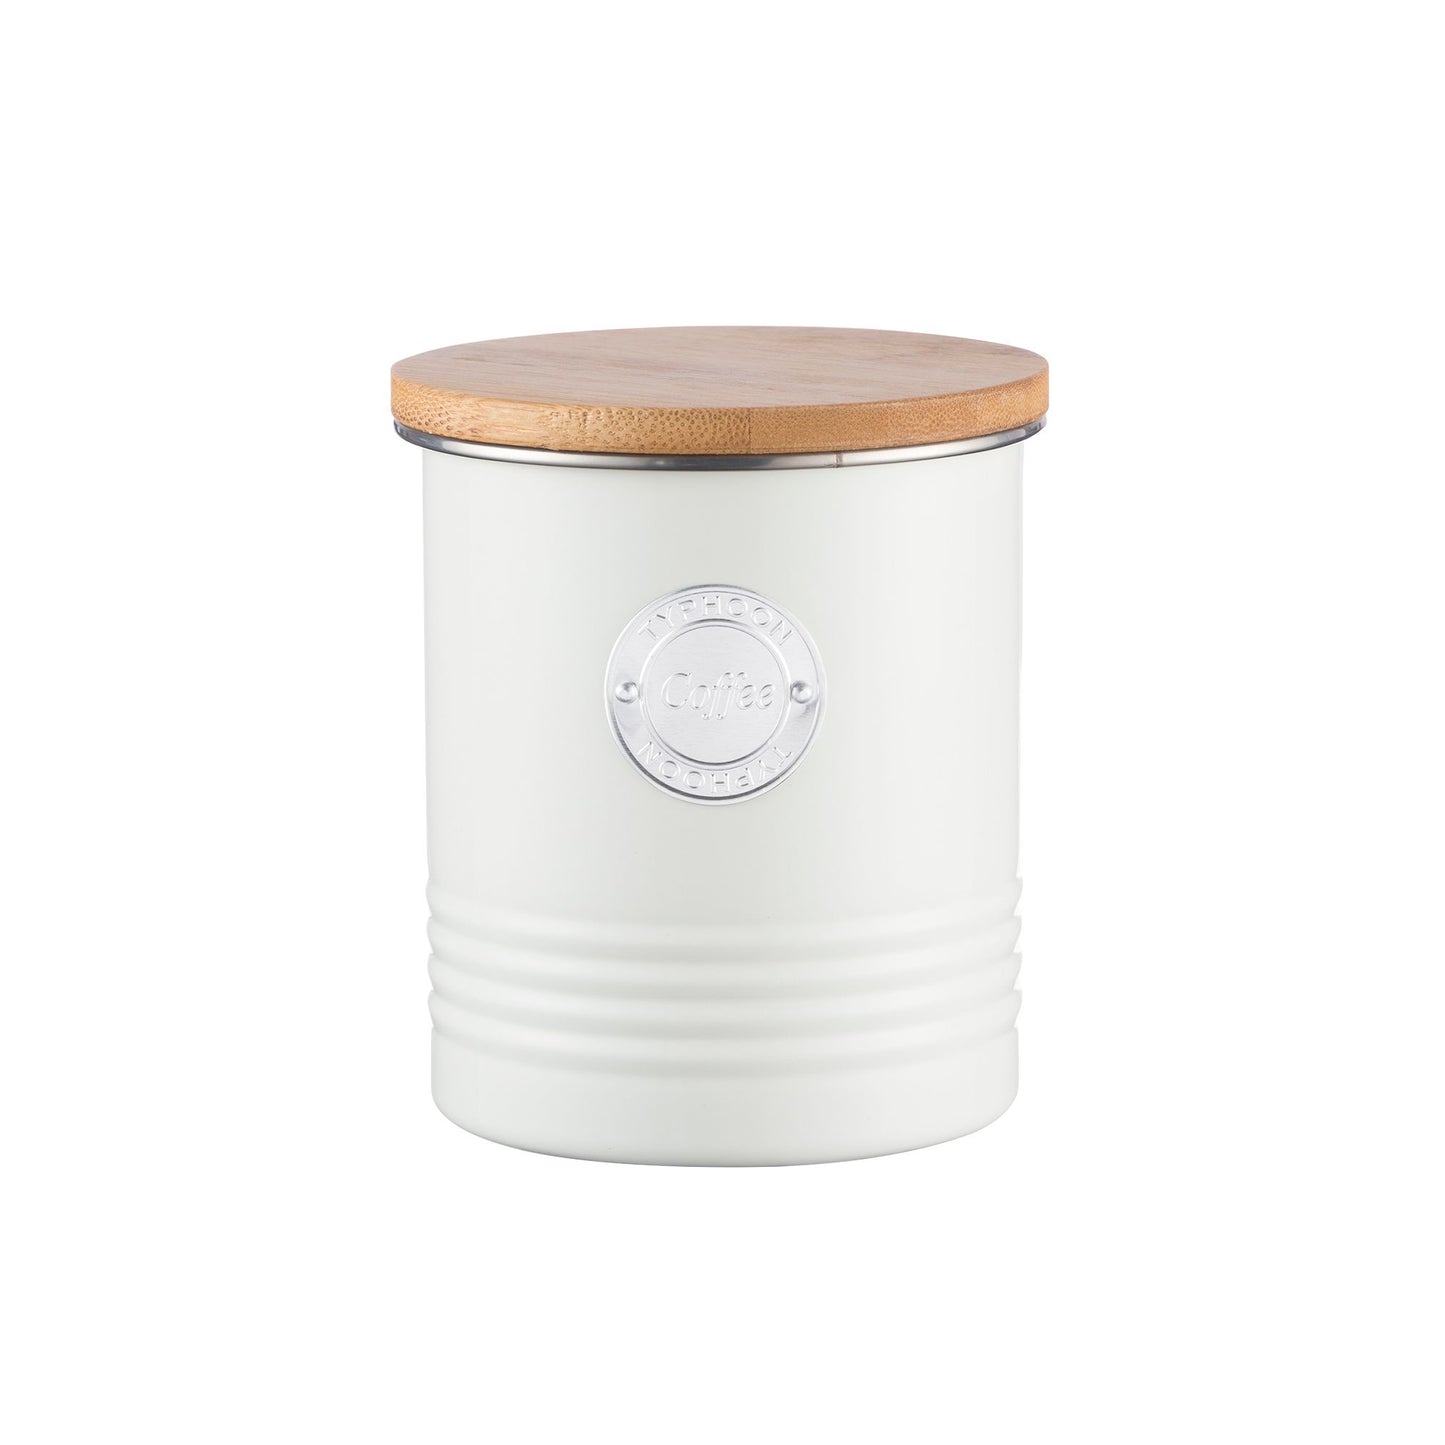 Typhoon Living Coffee Canister 1 L - Cream